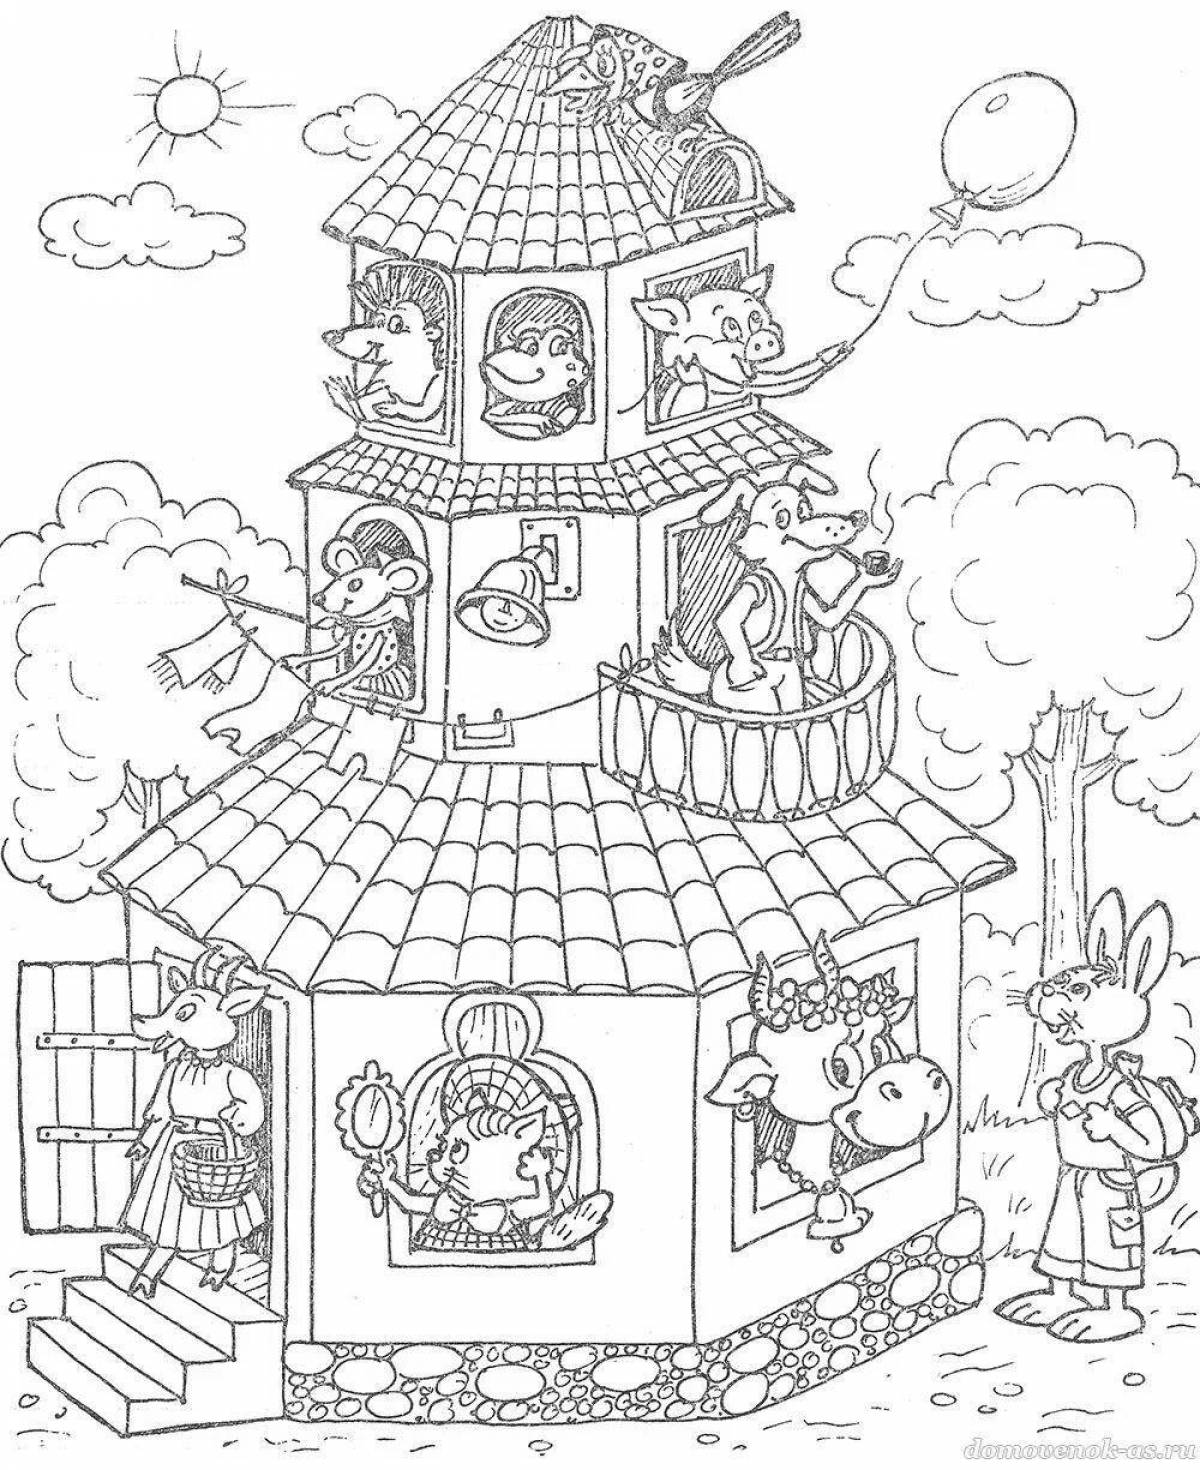 Glowing cat house coloring page for kids